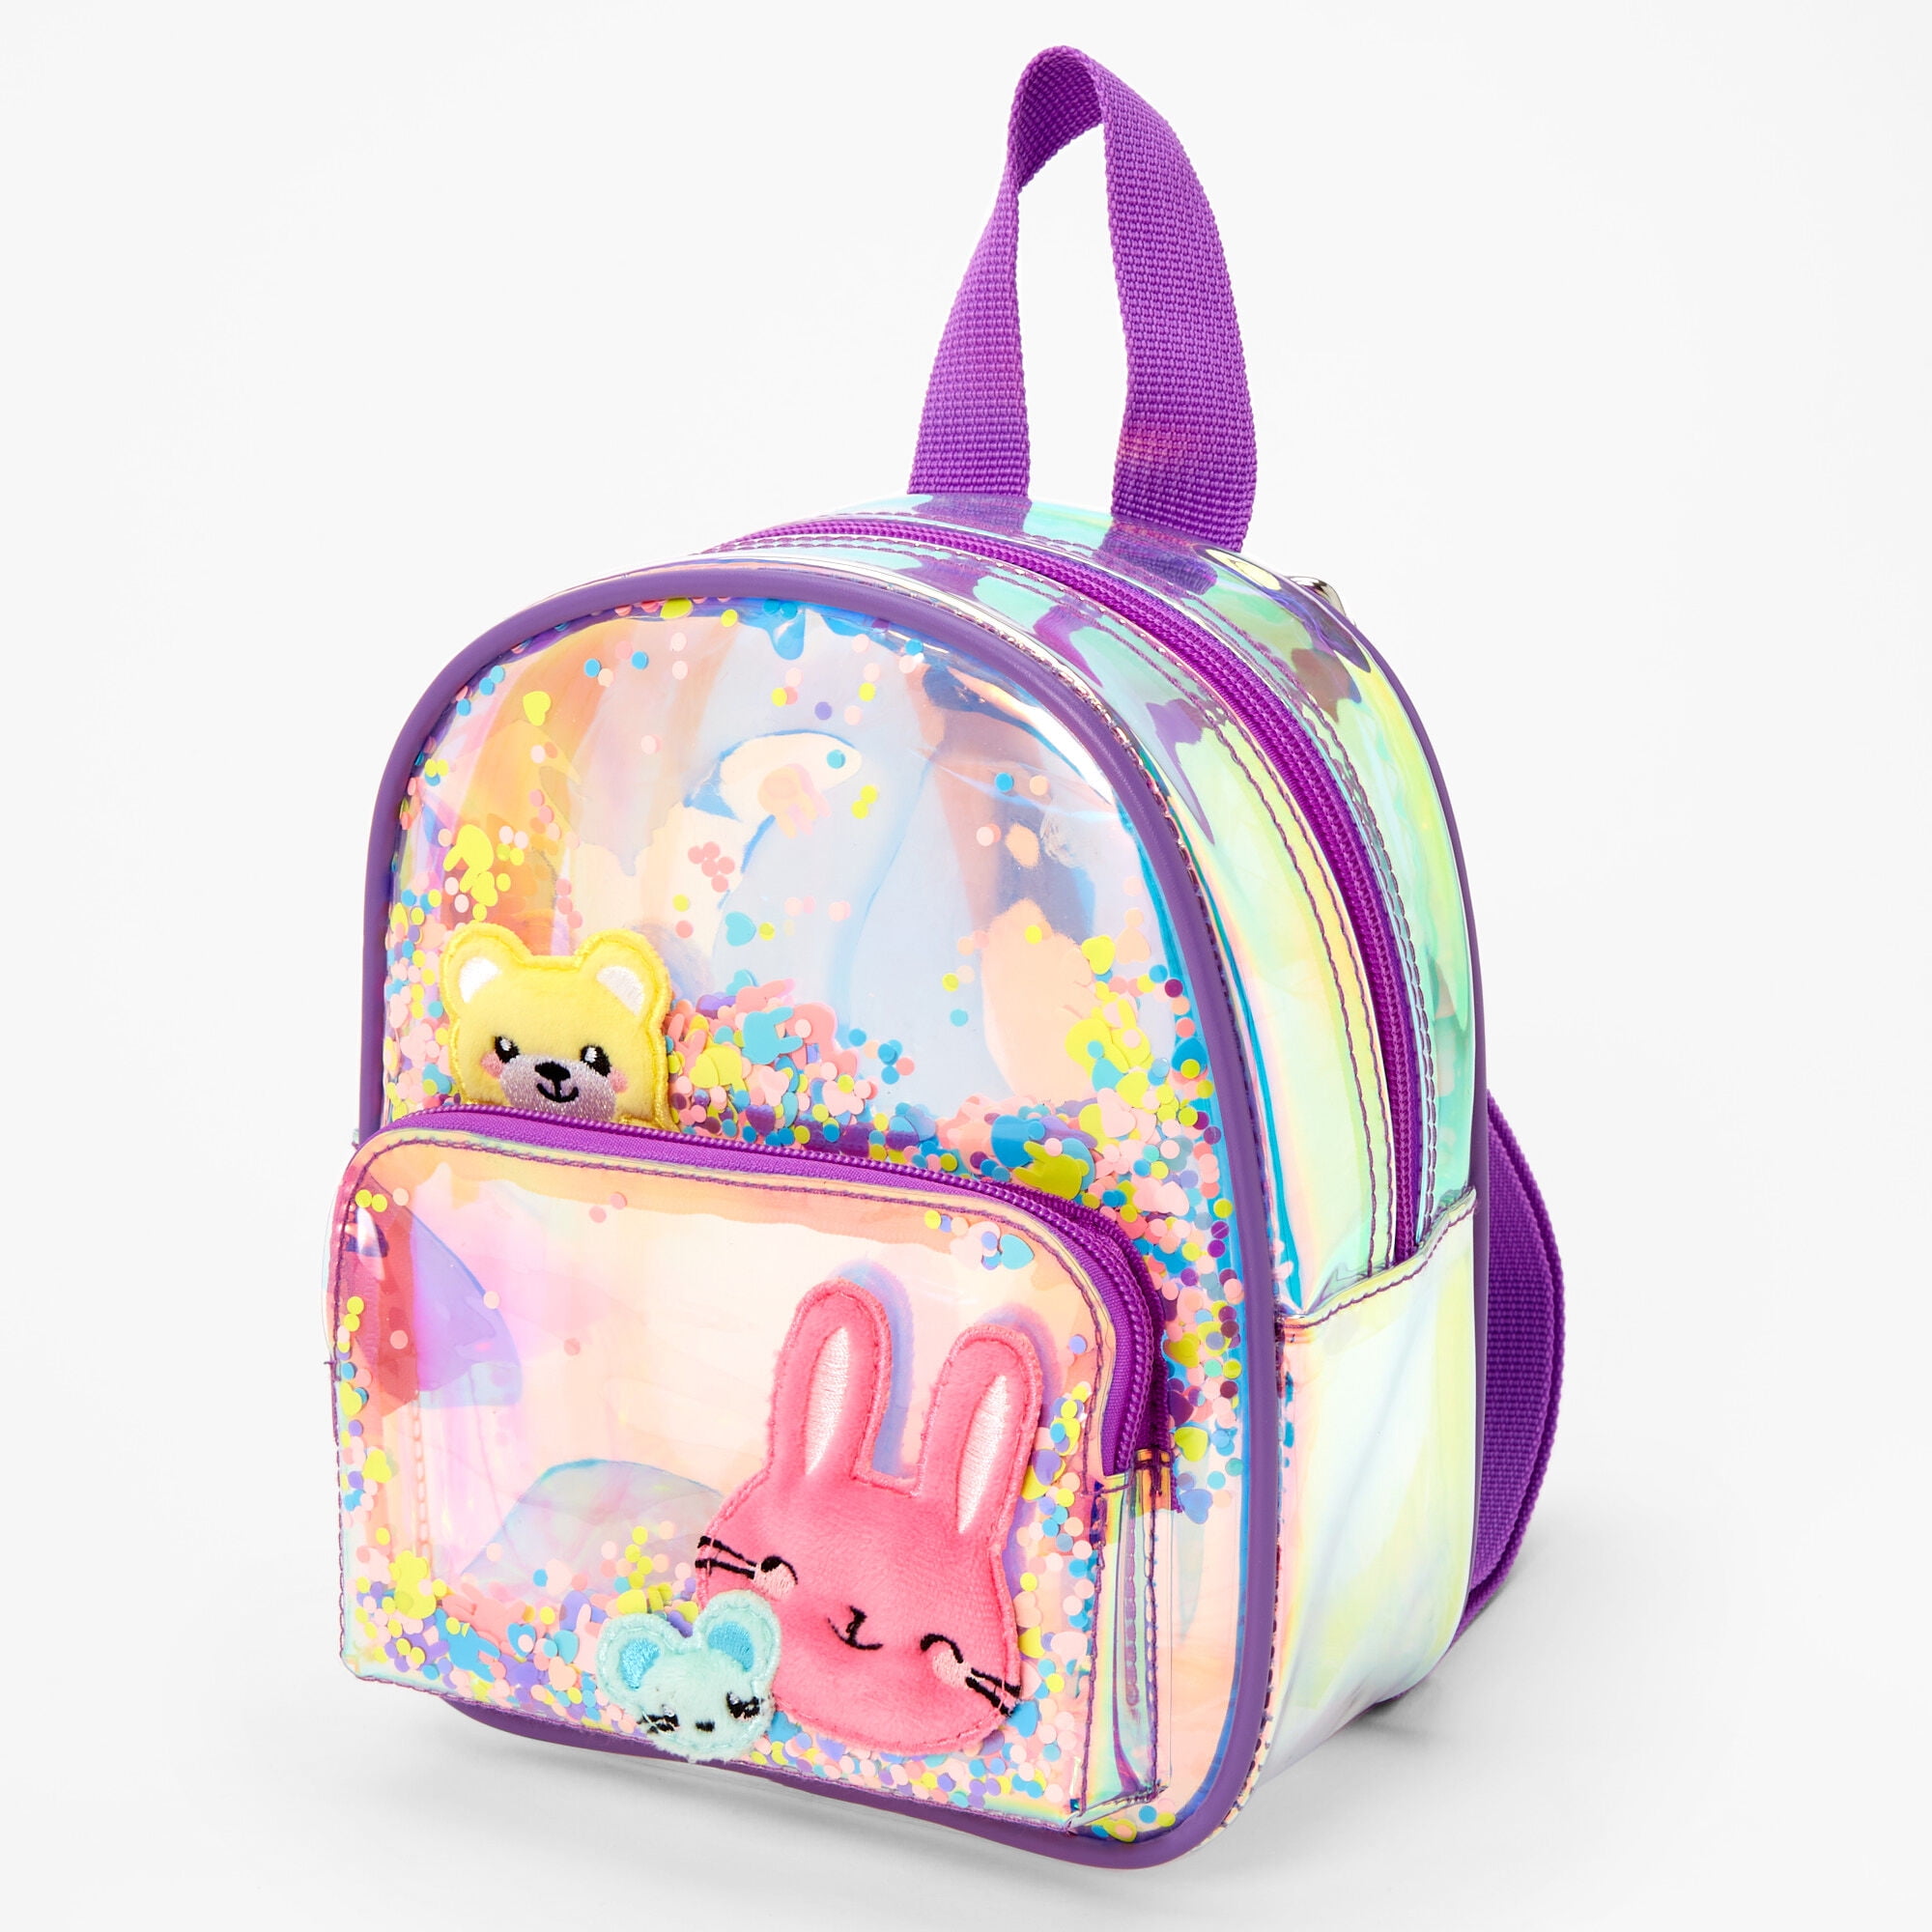 Claire's Club Mini Backpack for Girls Age 3-6 - Little Girl Purse